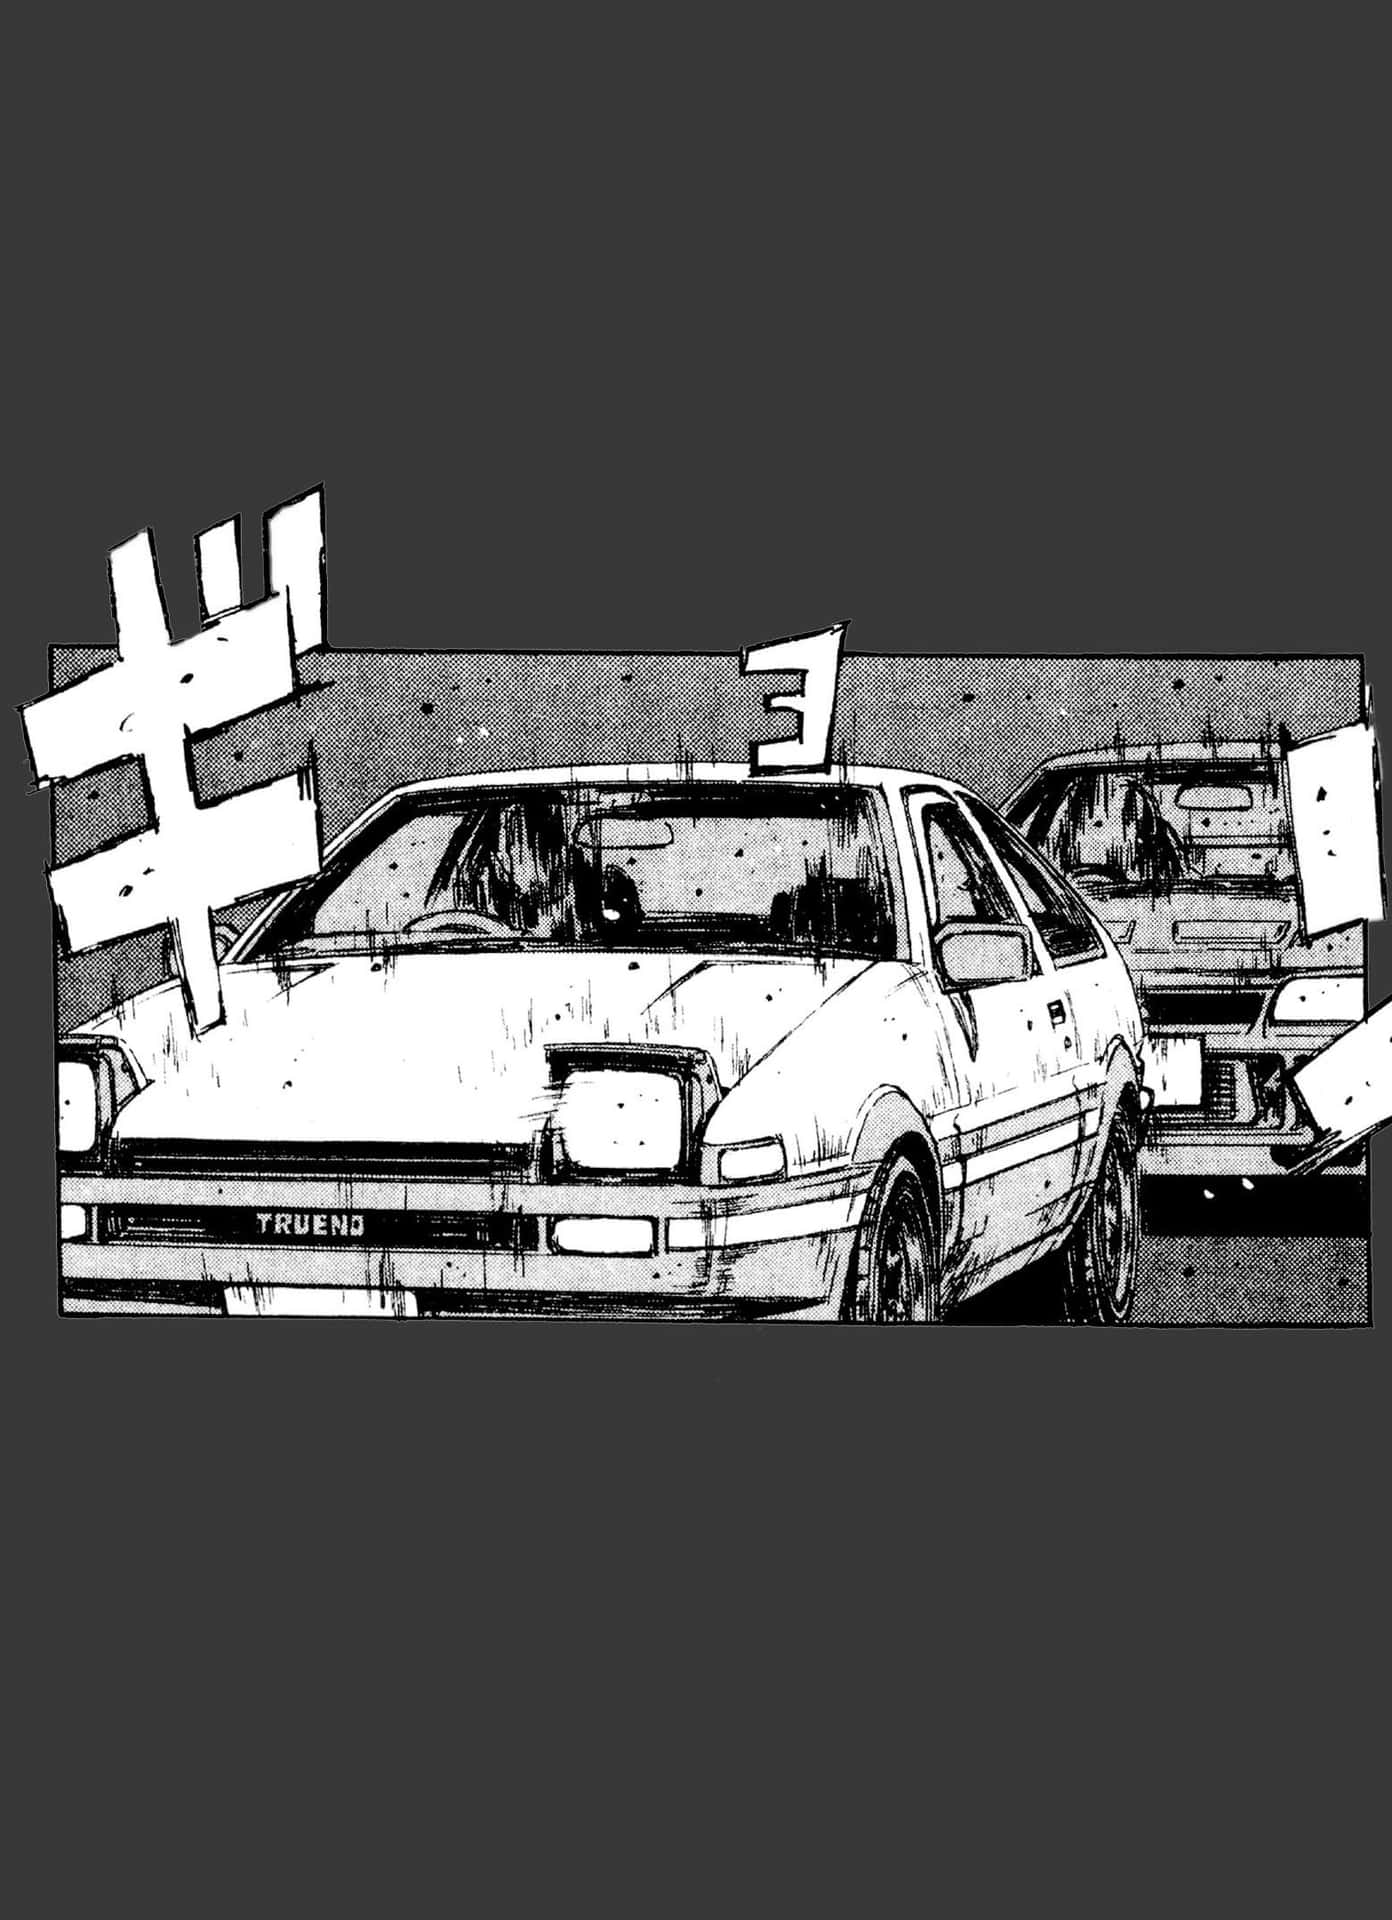 Experience the exhilaration of speed with Initial D phone Wallpaper